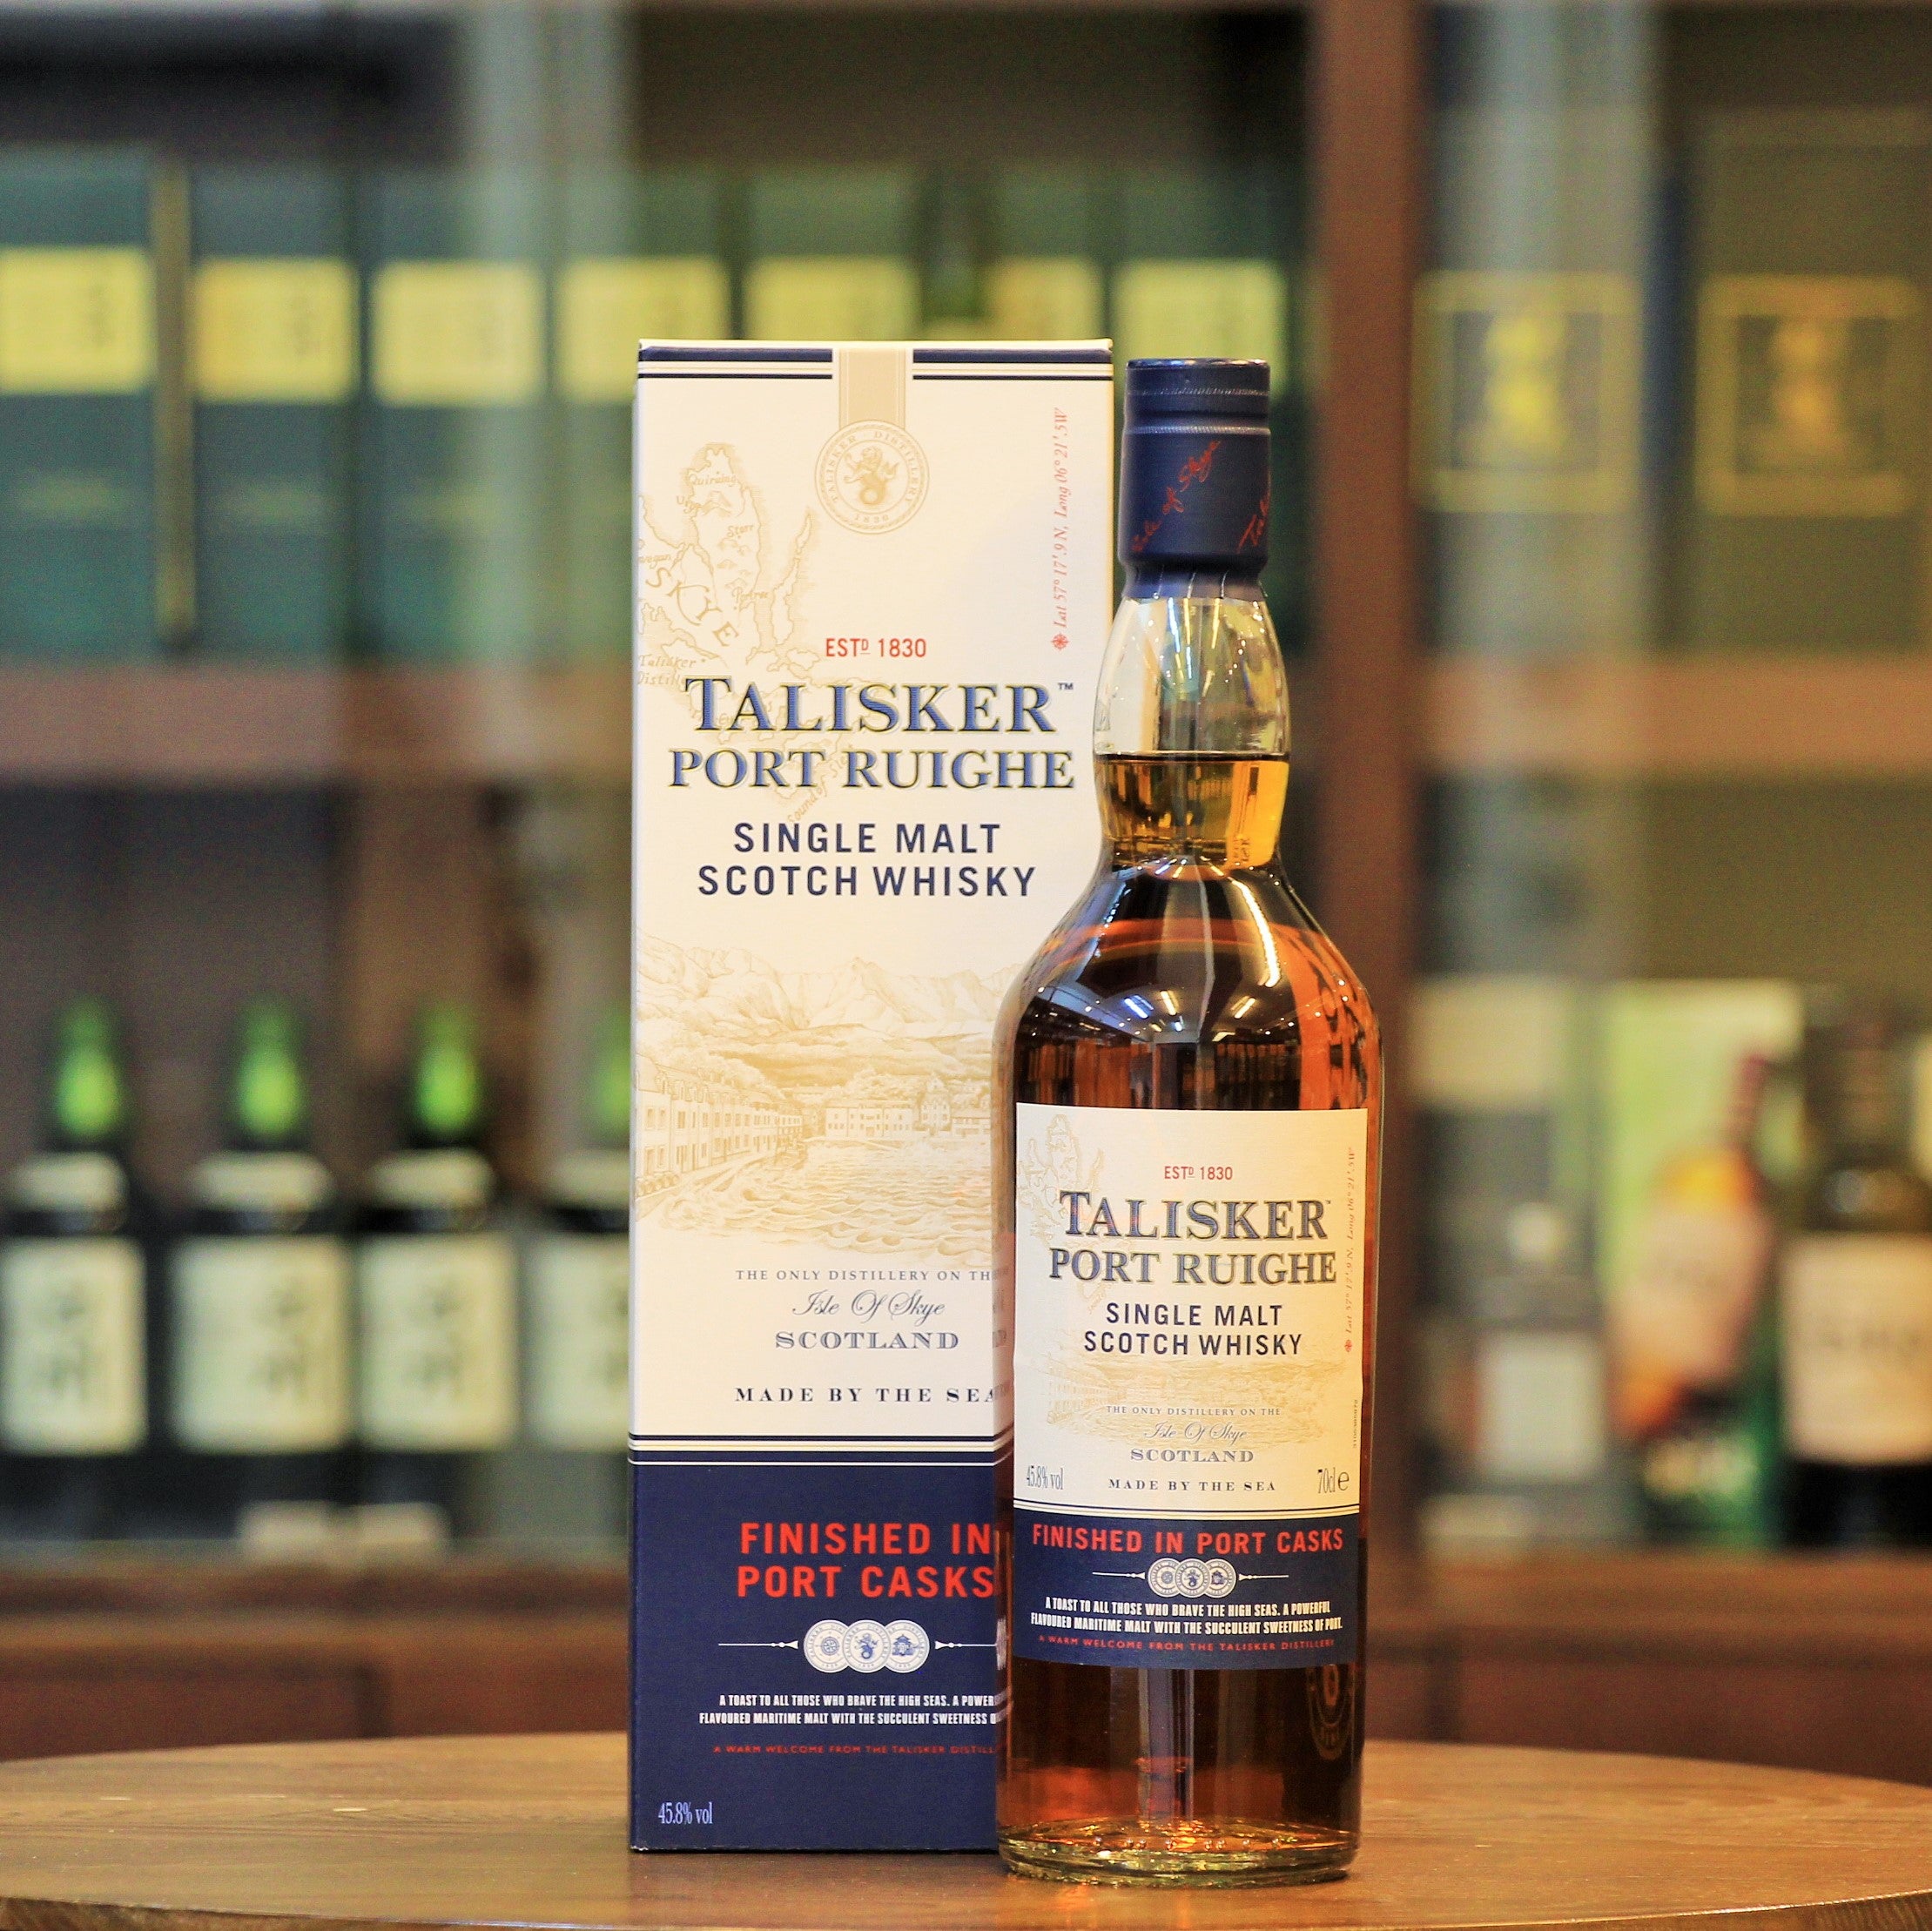 An addition to the range from this Isle of Skye Distillery since 2013, this whisky is finished in Port Casks (an ode to its 19th century past wherein Talisker had been matured in Port Casks given the history of port wine wine trade with merchants of coastal Scotland) Talisker Port Ruighe, named after the main trading port on Isle of Skye, combines its traditional coastal, maritime, subtle smokiness and peppery character of the distillery with the sweet notes of rich berry fruits.  